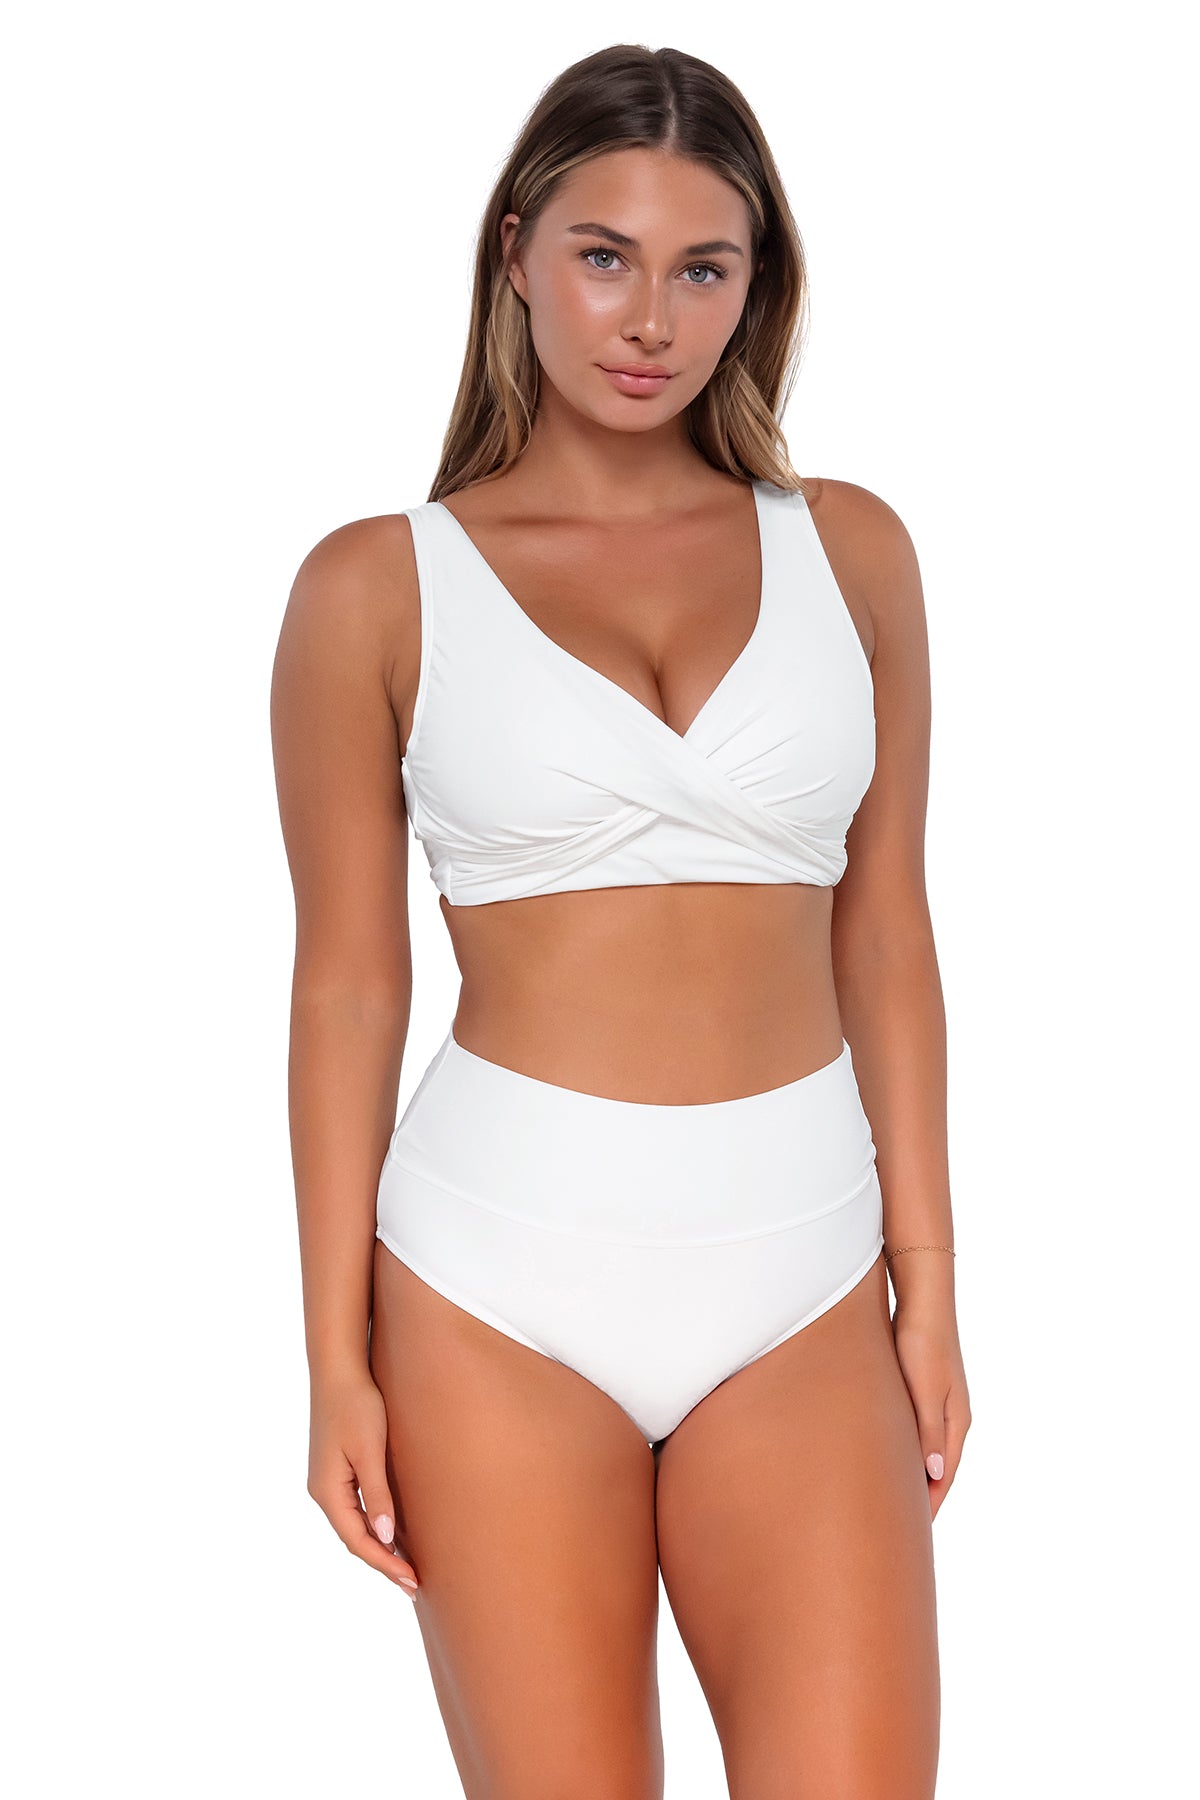 Front pose #1 of Taylor wearing Sunsets White Lily Hannah High Waist Bottom with matching Elsie Top underwire bikini